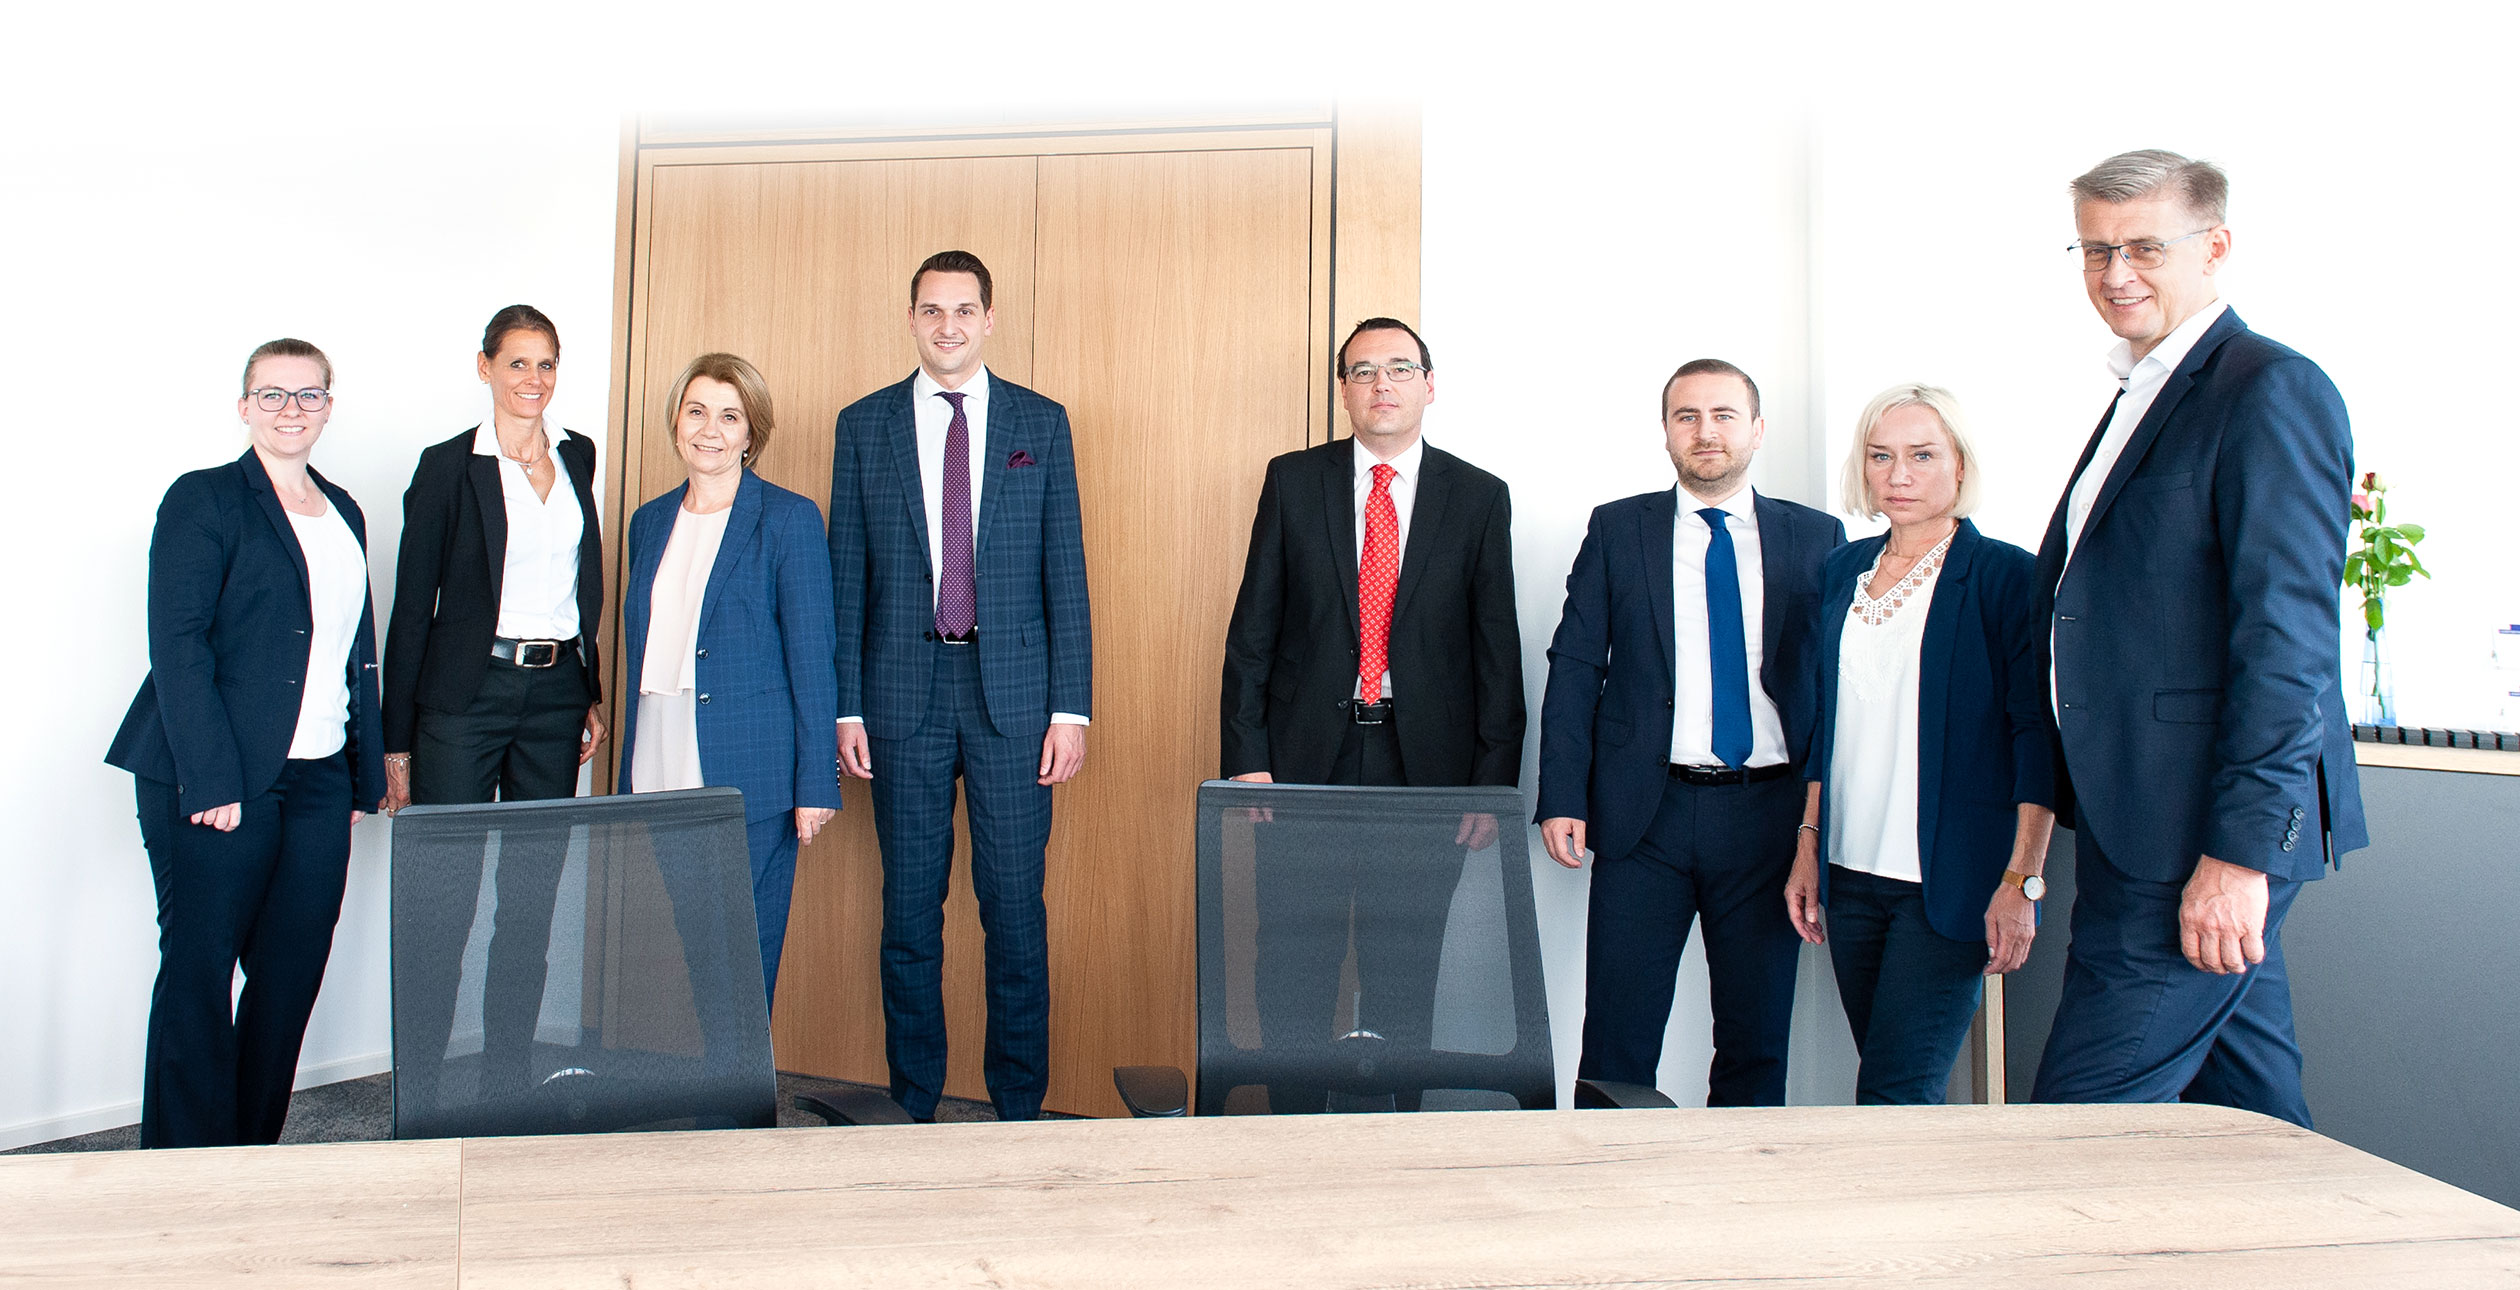 LAWPARTNERS Attorneys at law – a strong team for our clients.